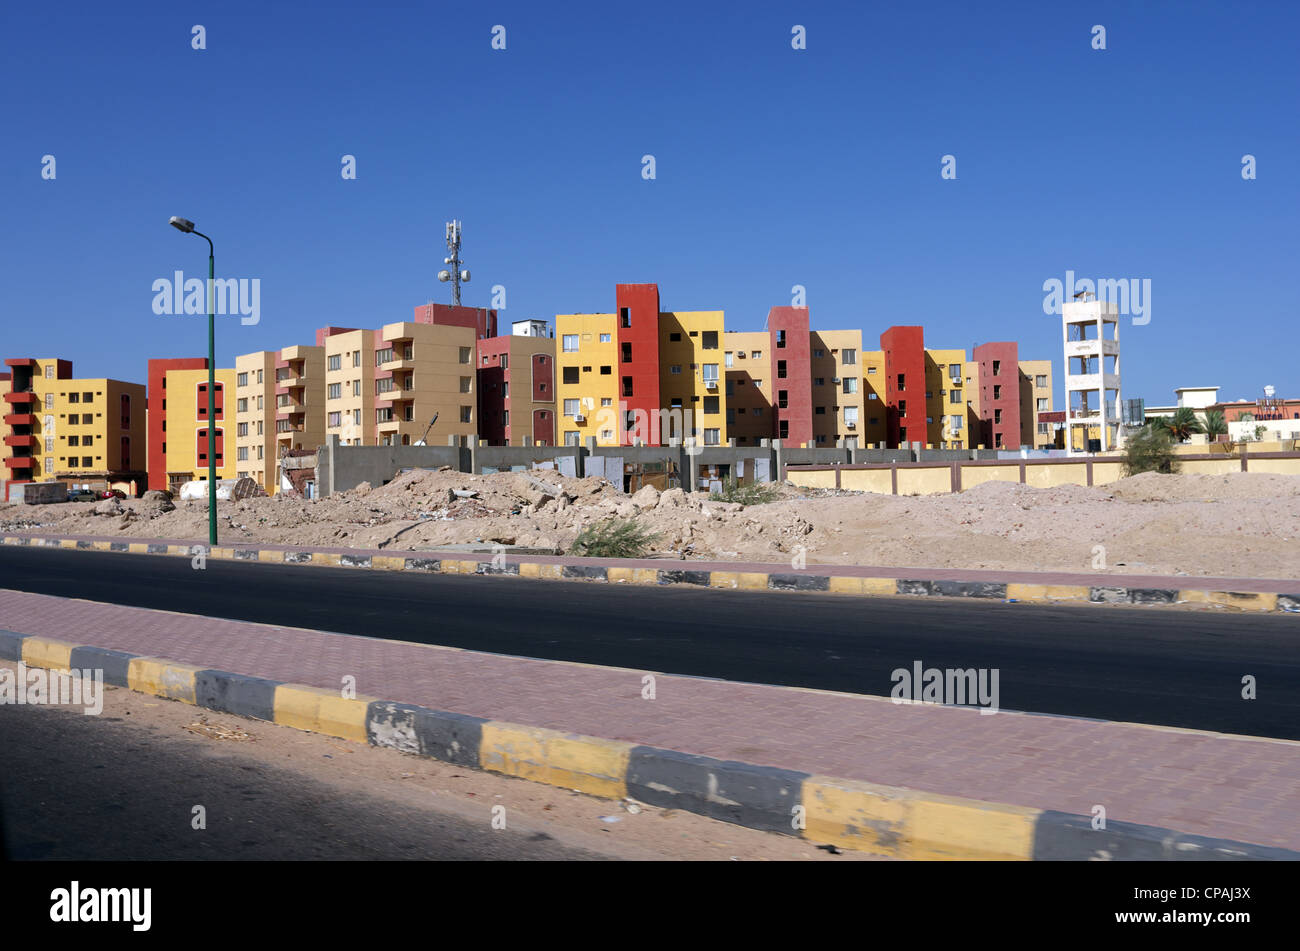 Scenes of streets, houses, architecture, Hurghada, Egypt, Africa Stock Photo